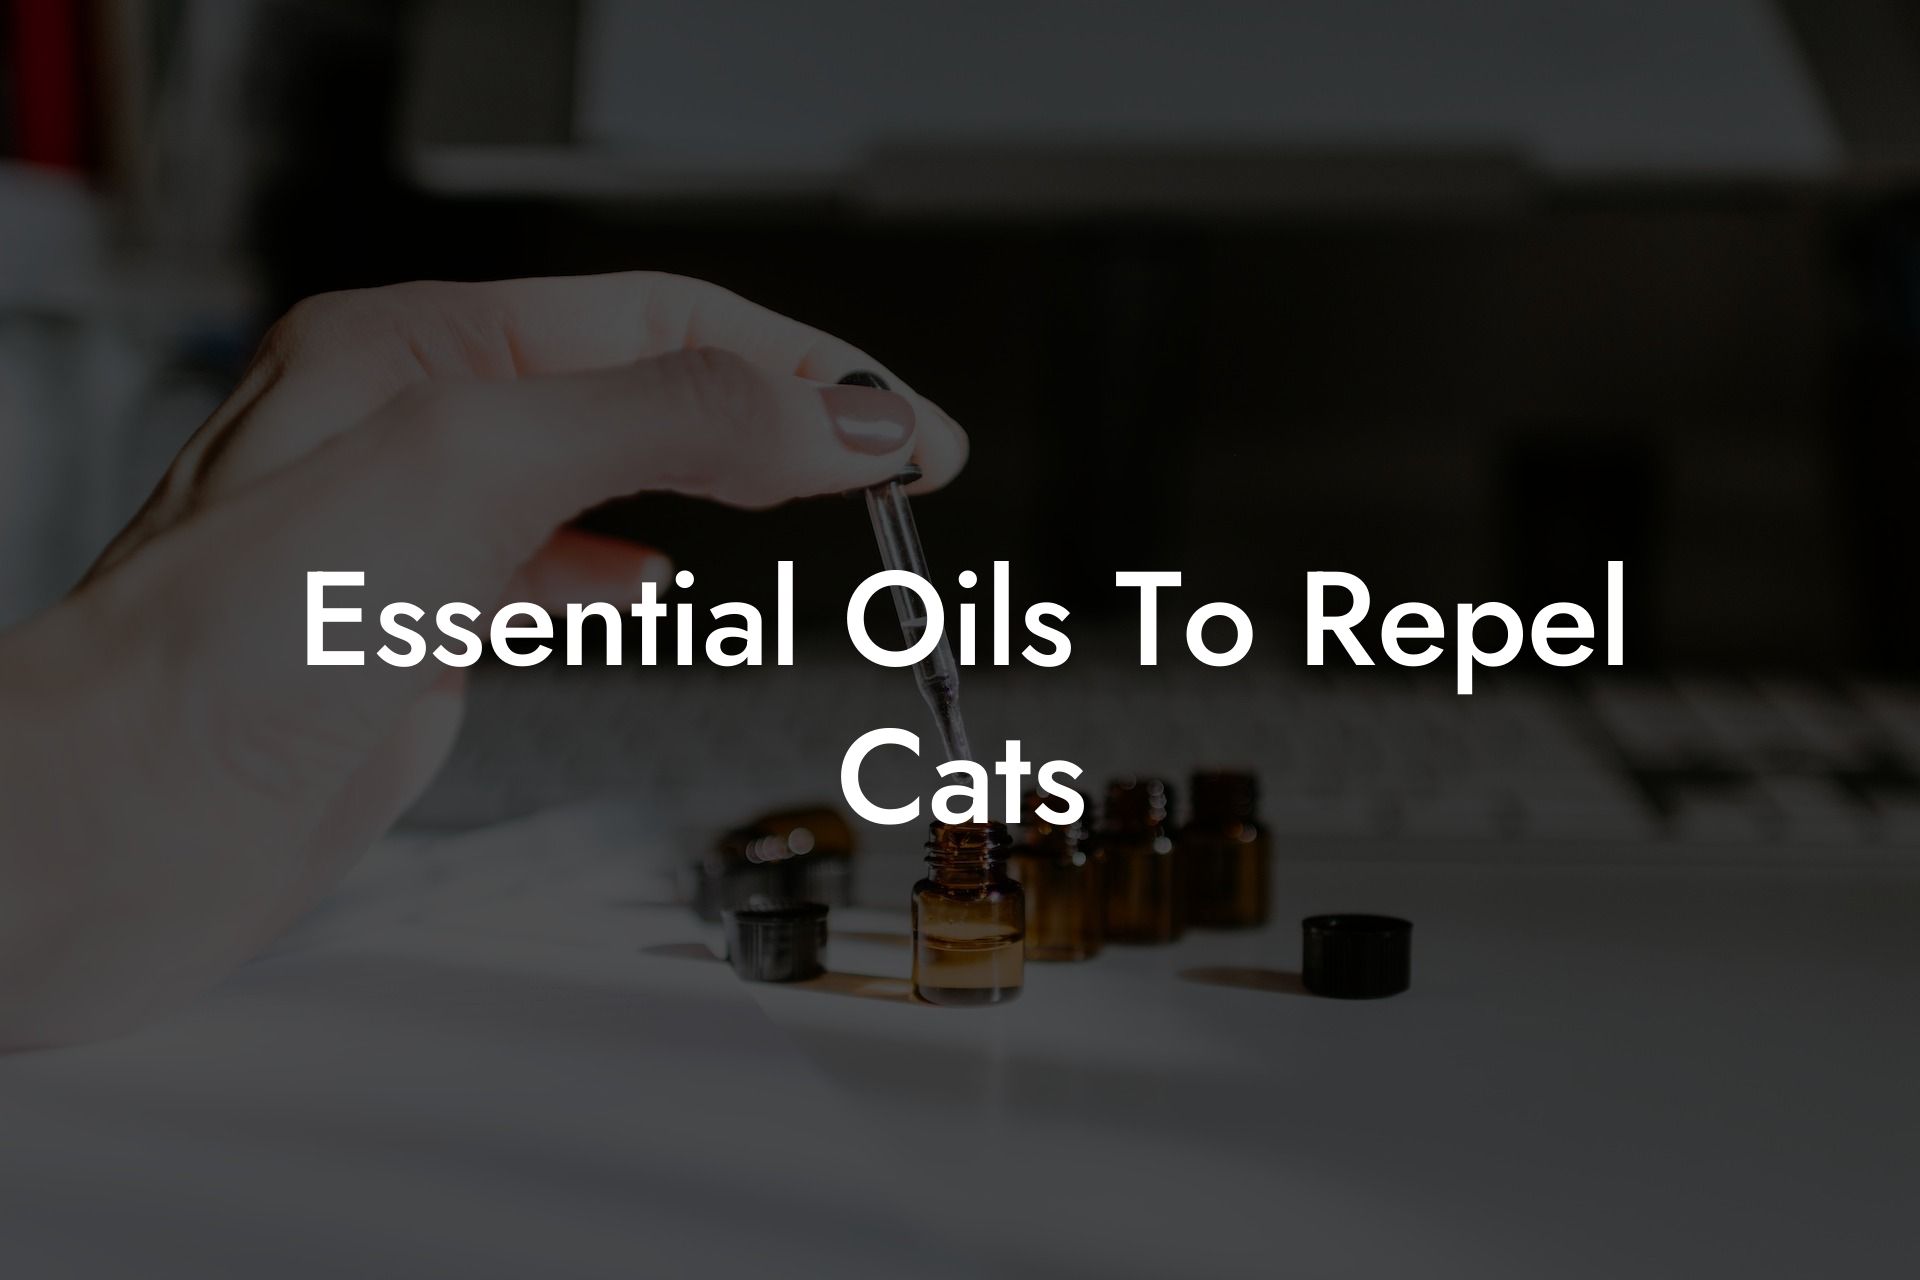 Essential Oils To Repel Cats